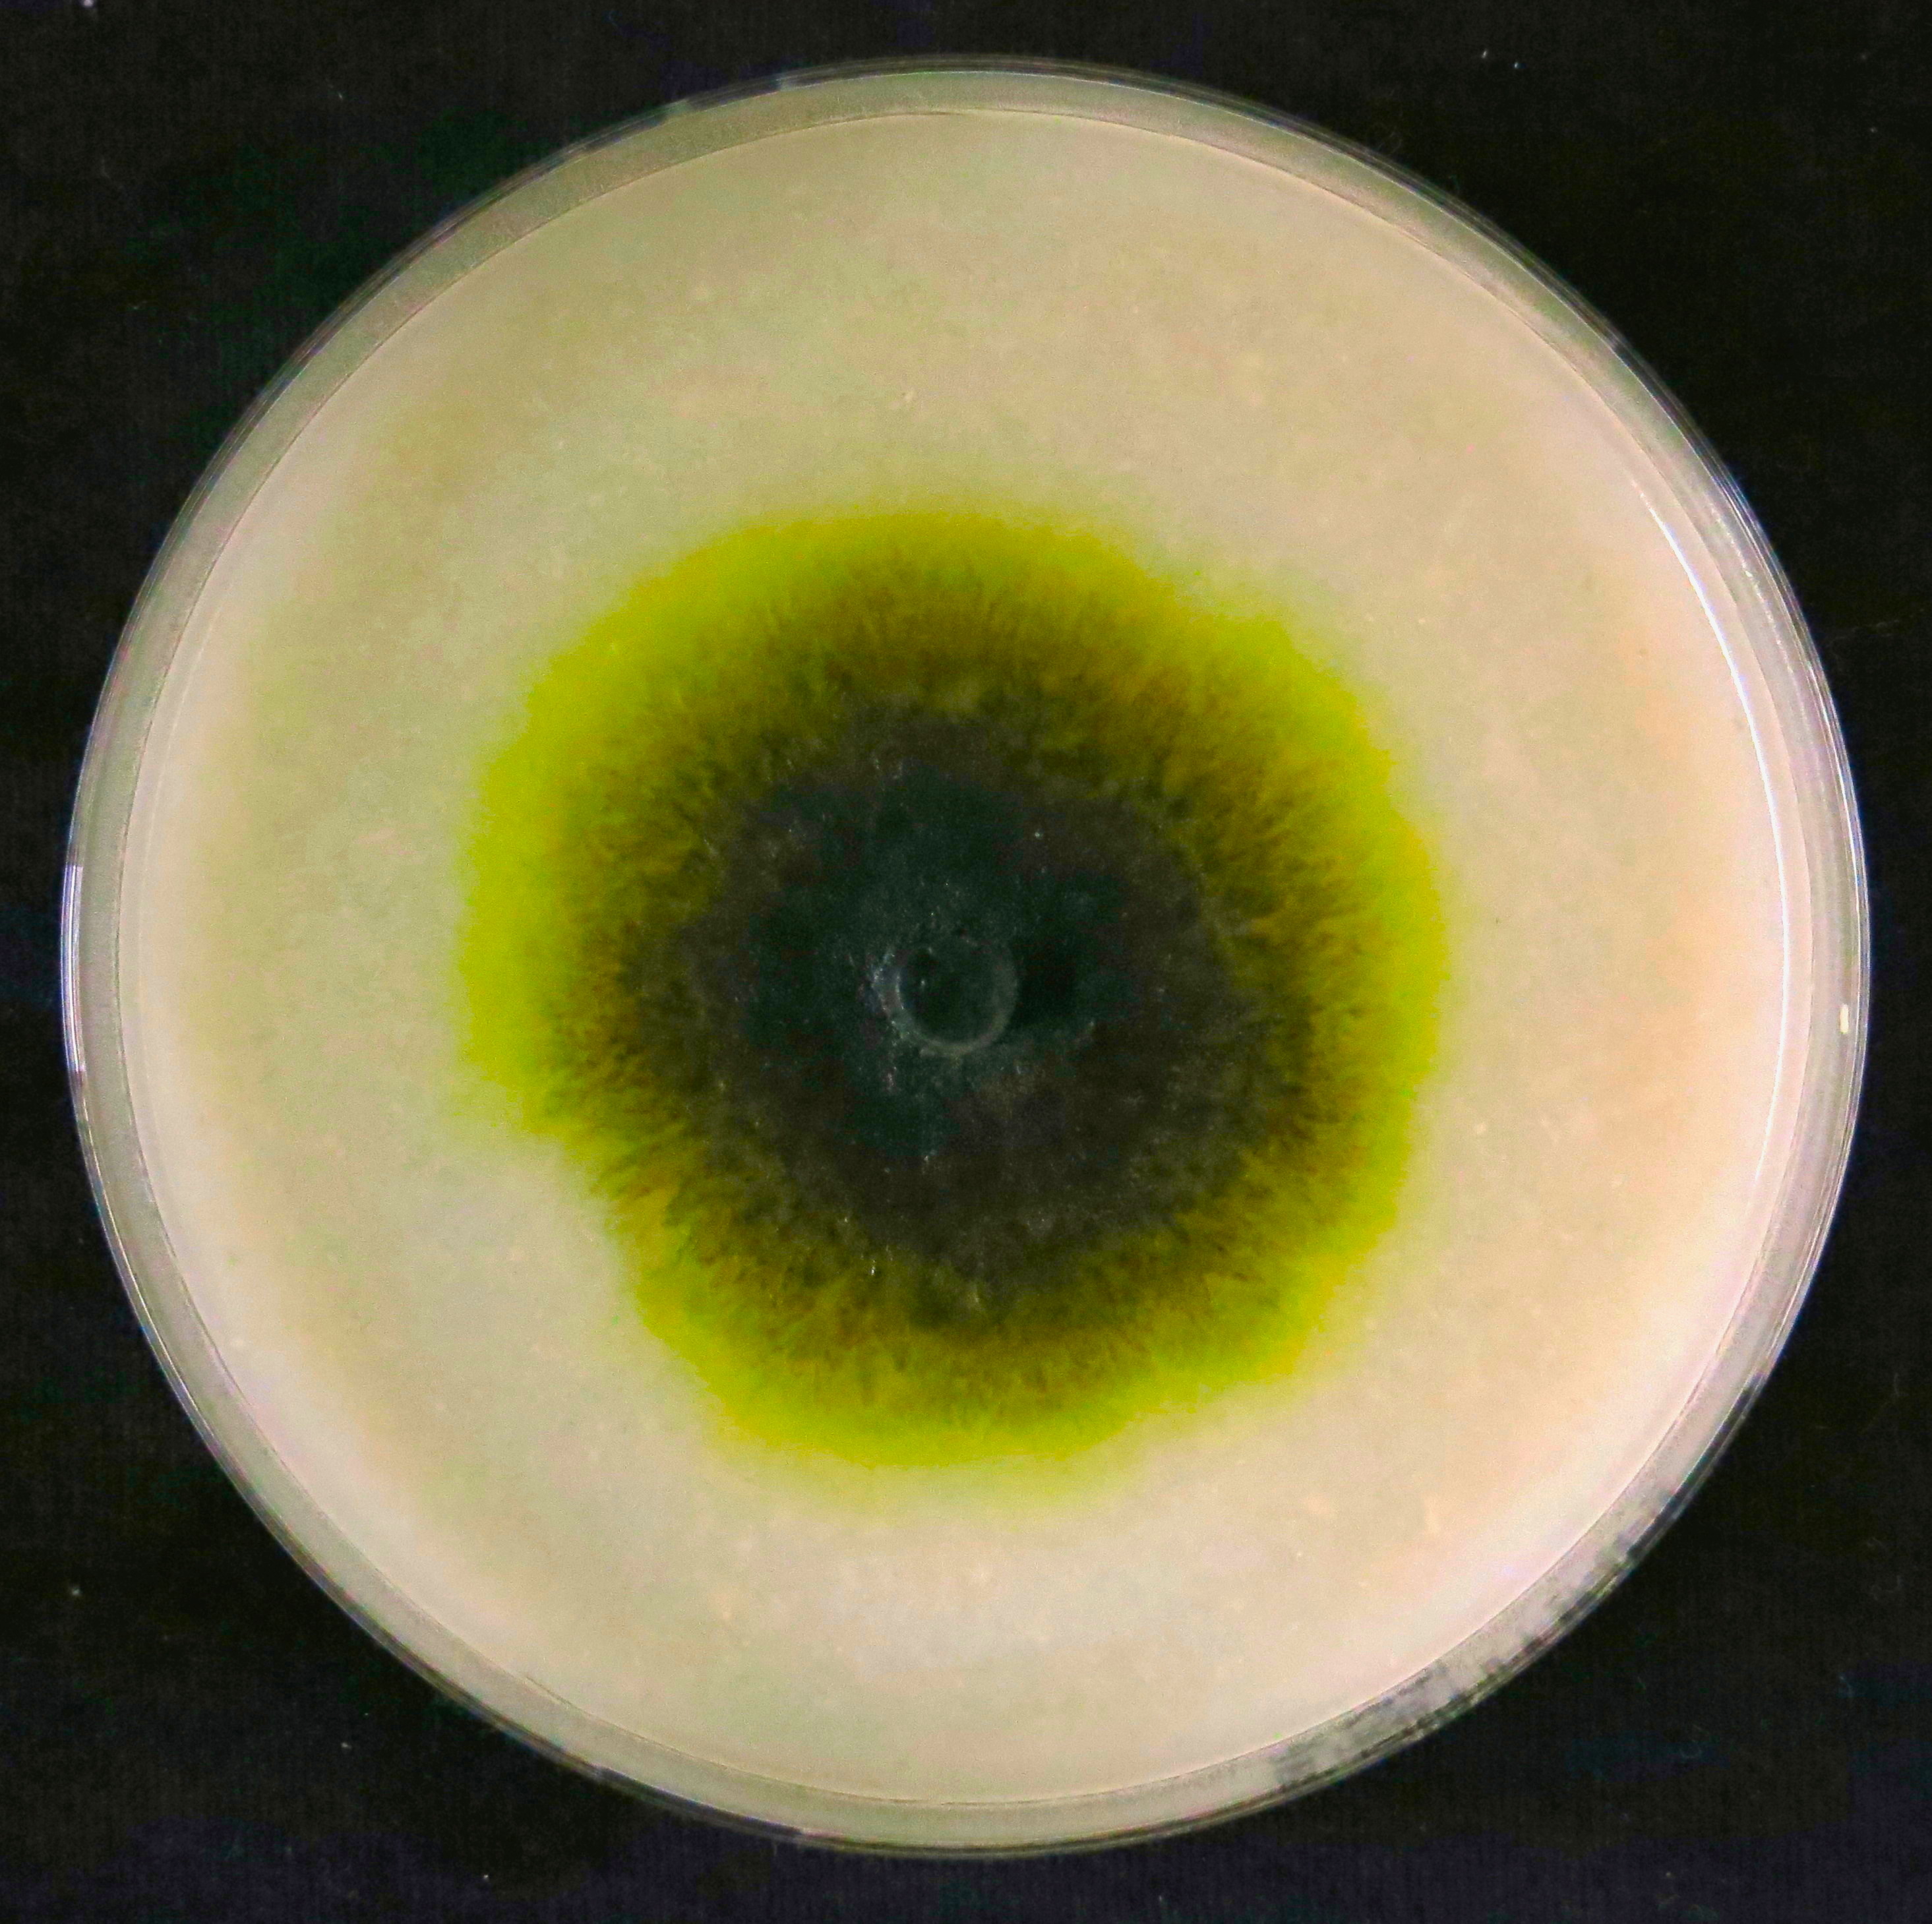 Colony growing on Oat Meal Agar.